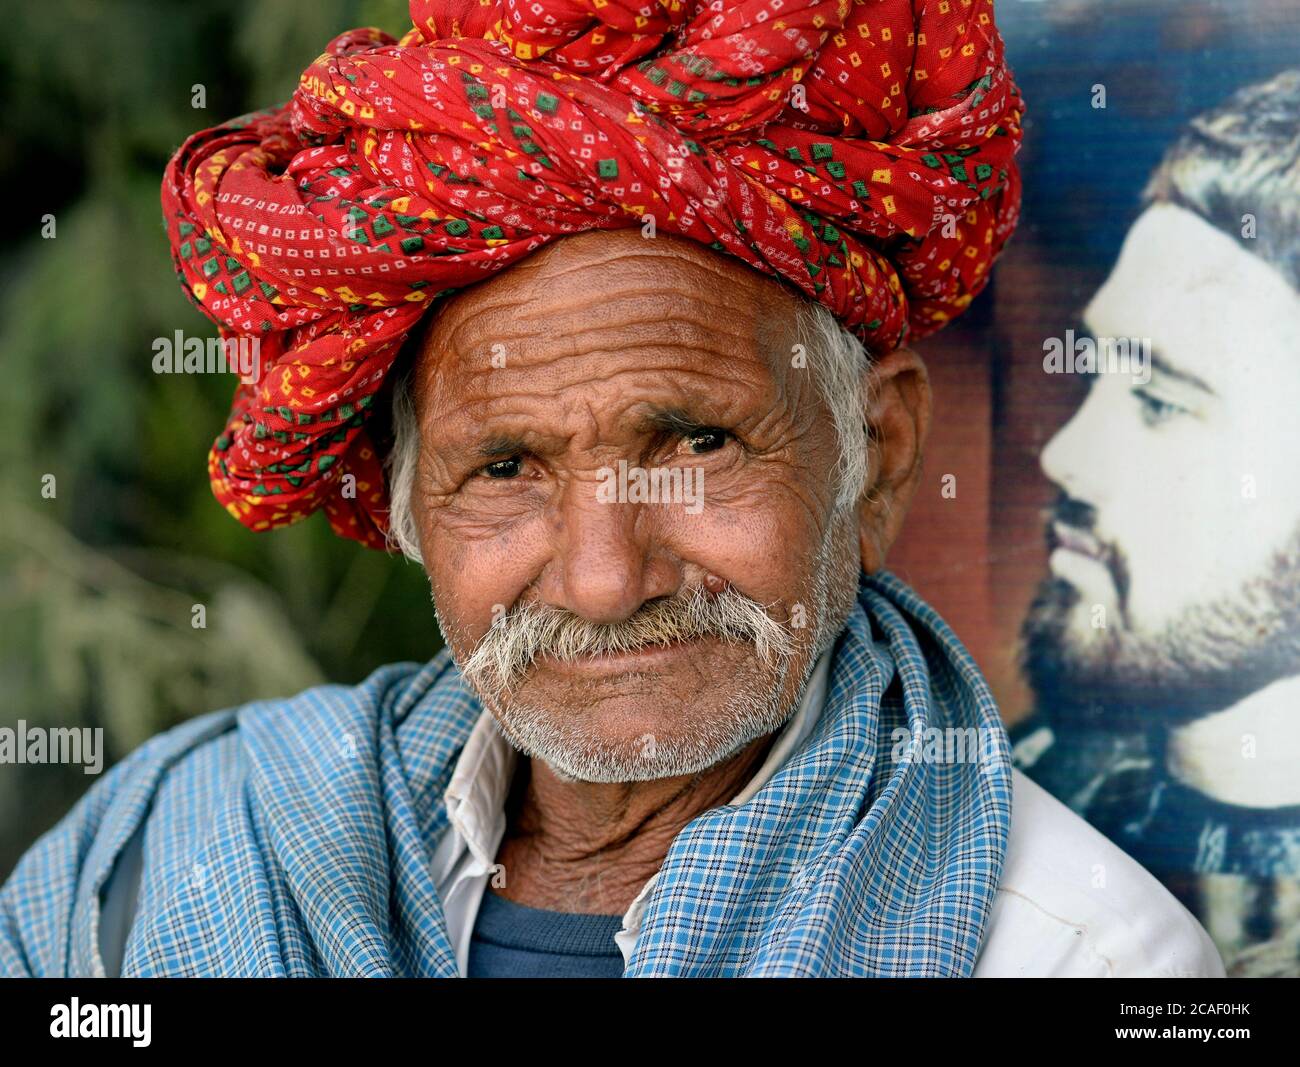 Old Indian Rajasthani man with moustache wears a colourful Rajasthani turban (pagari) and looks at the camera. Stock Photo